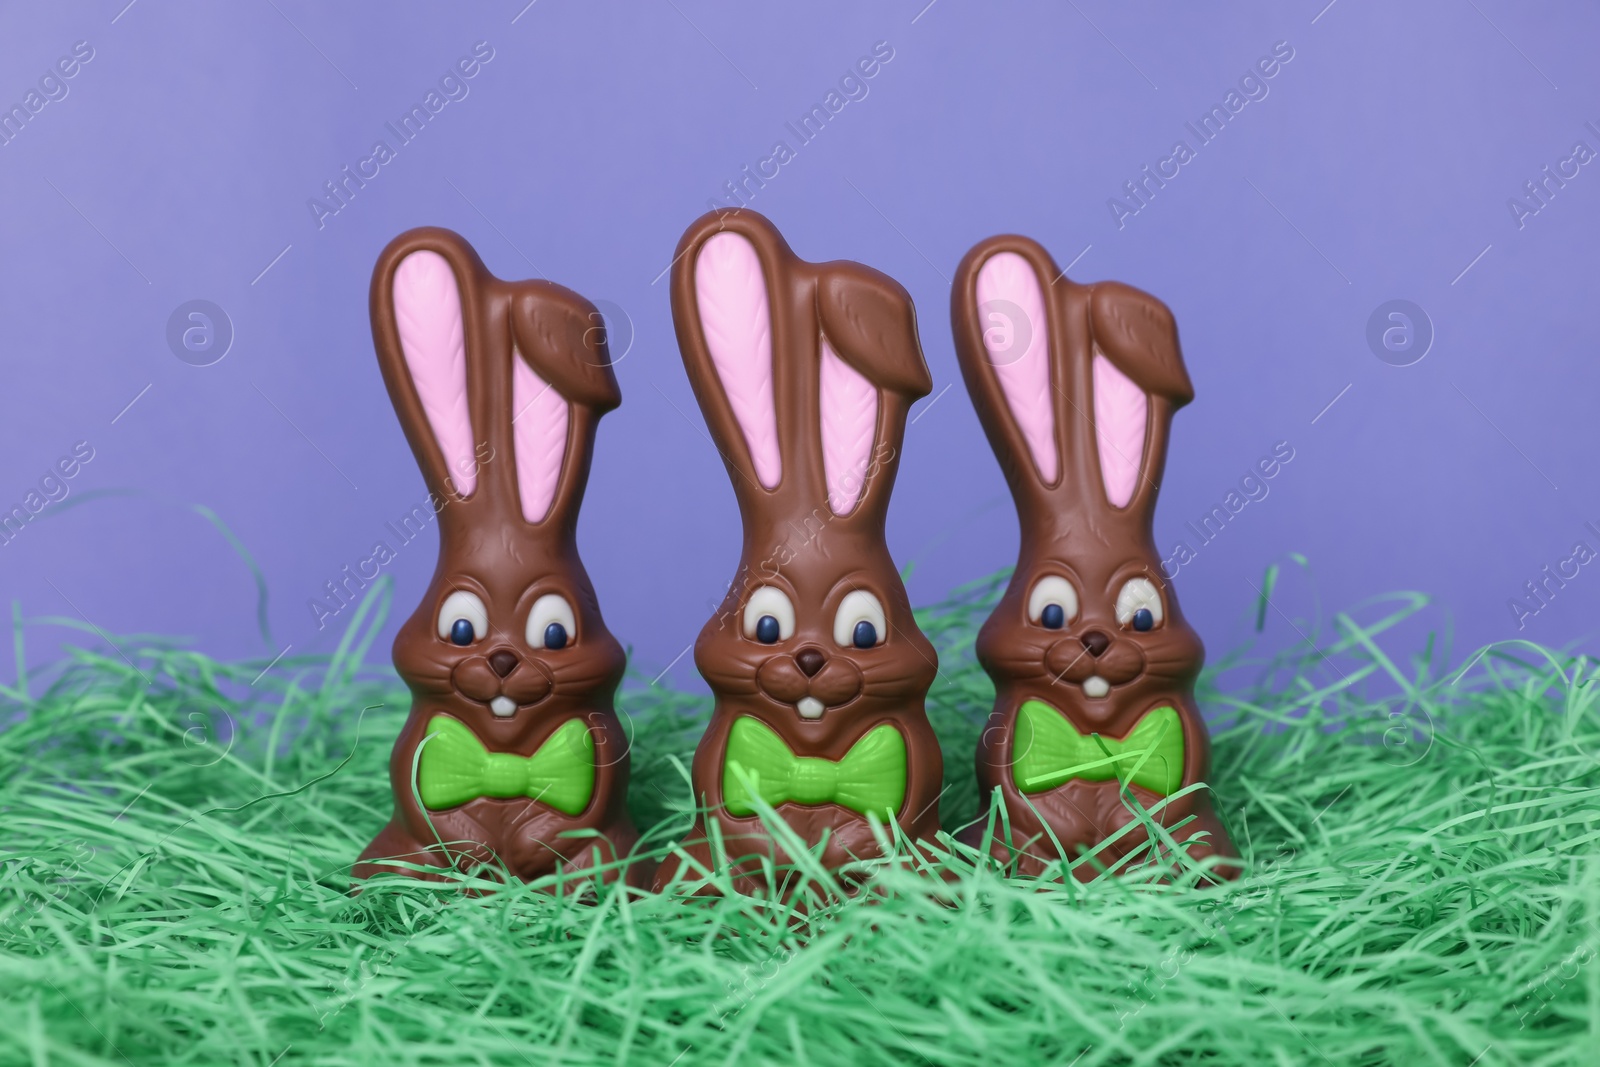 Photo of Easter celebration. Funny chocolate bunnies on grass against violet background